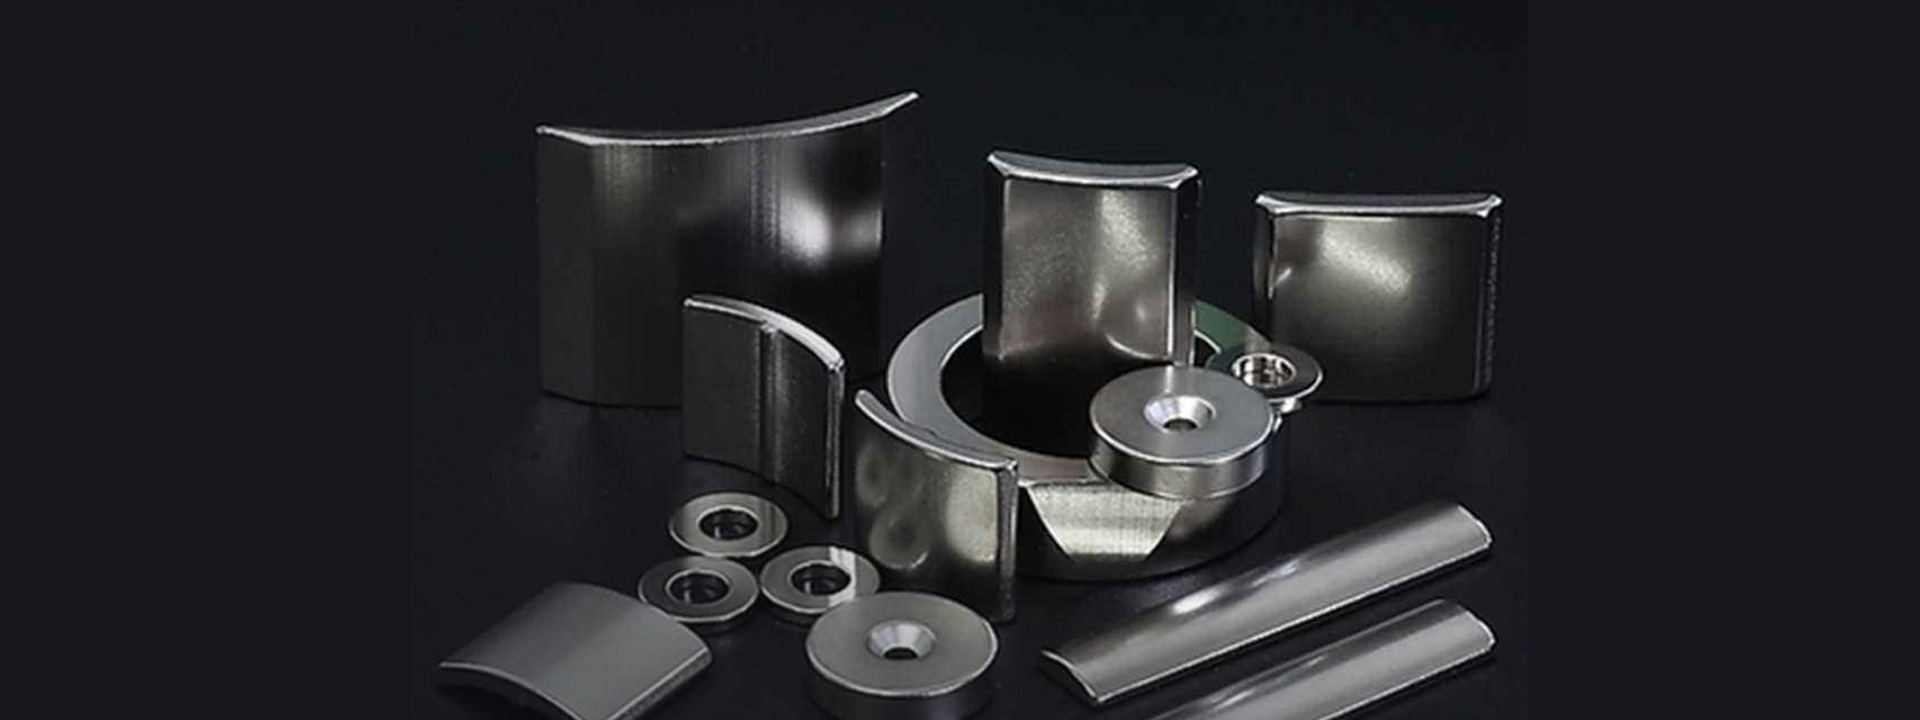 The new energy industry brings broad prospects to the rare earth permanent magnet industry